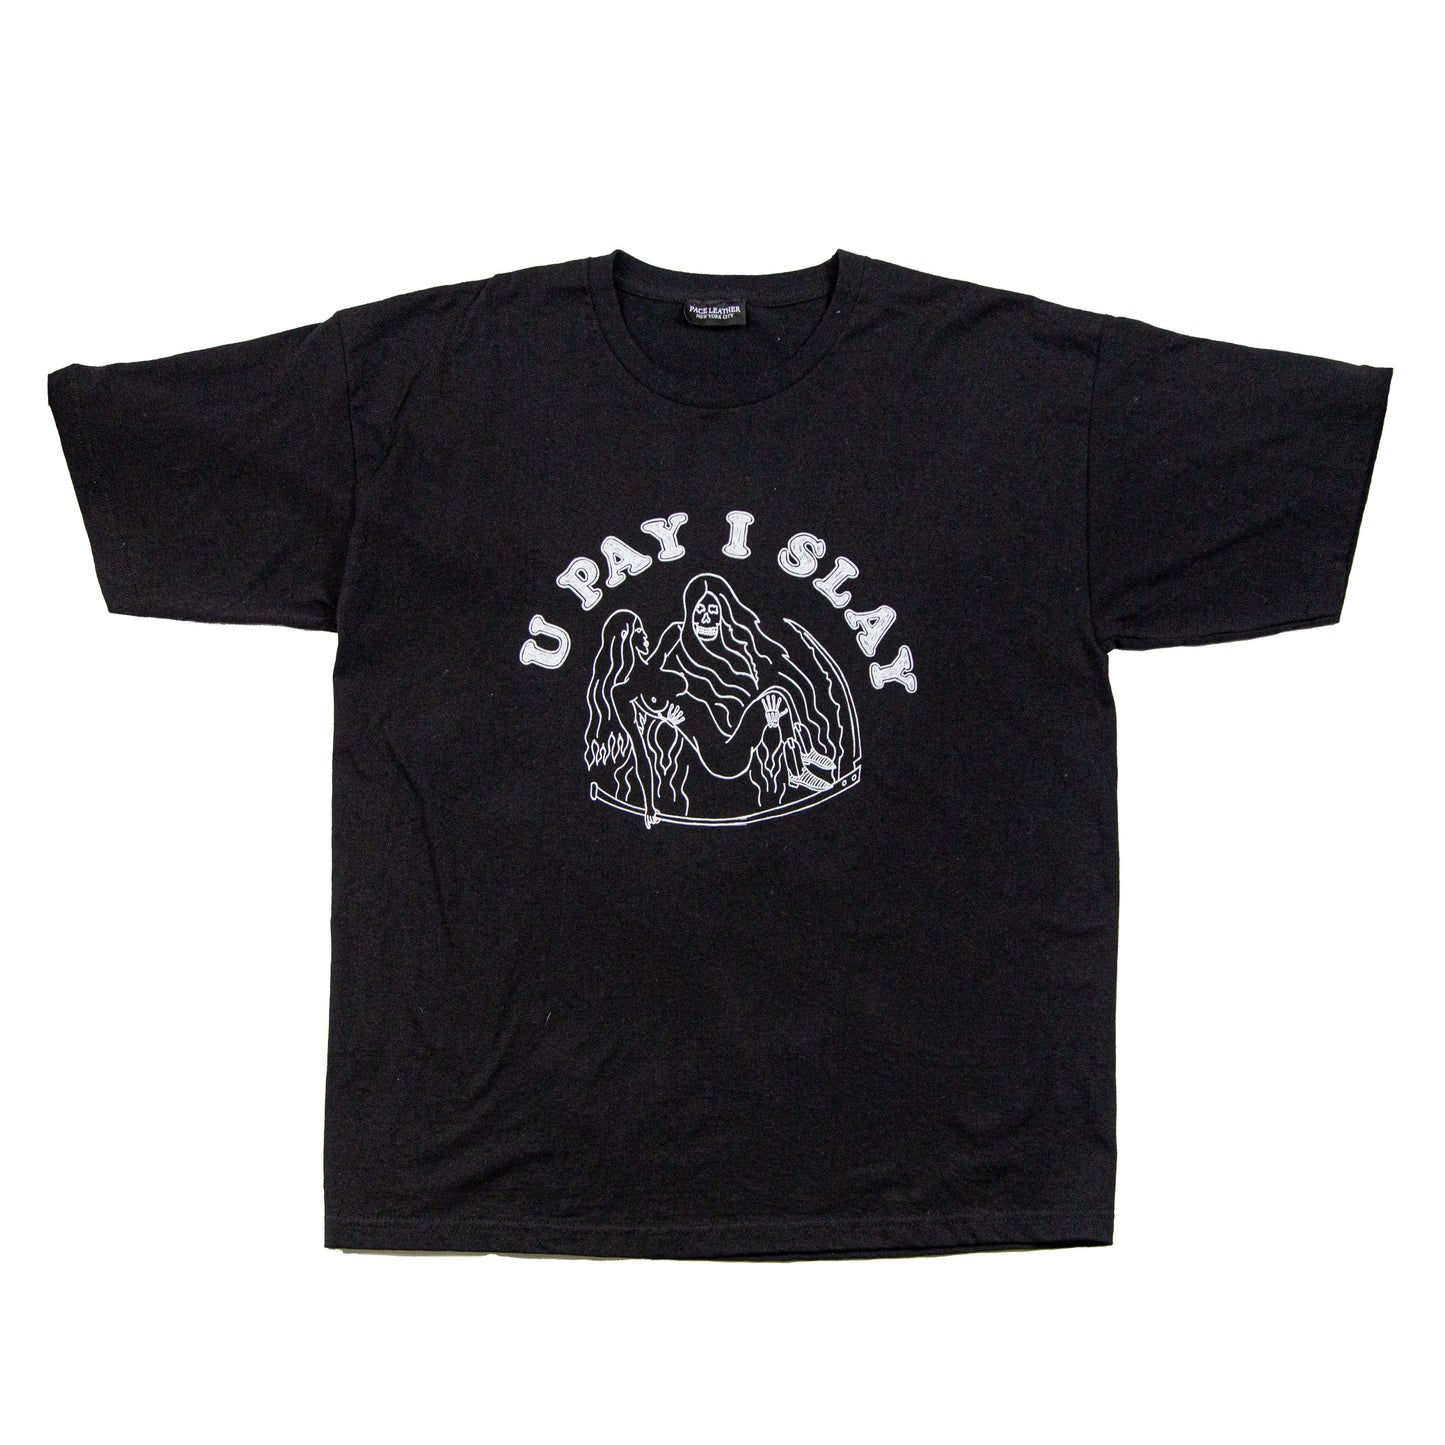 Pace Leather SLAY Tee Black